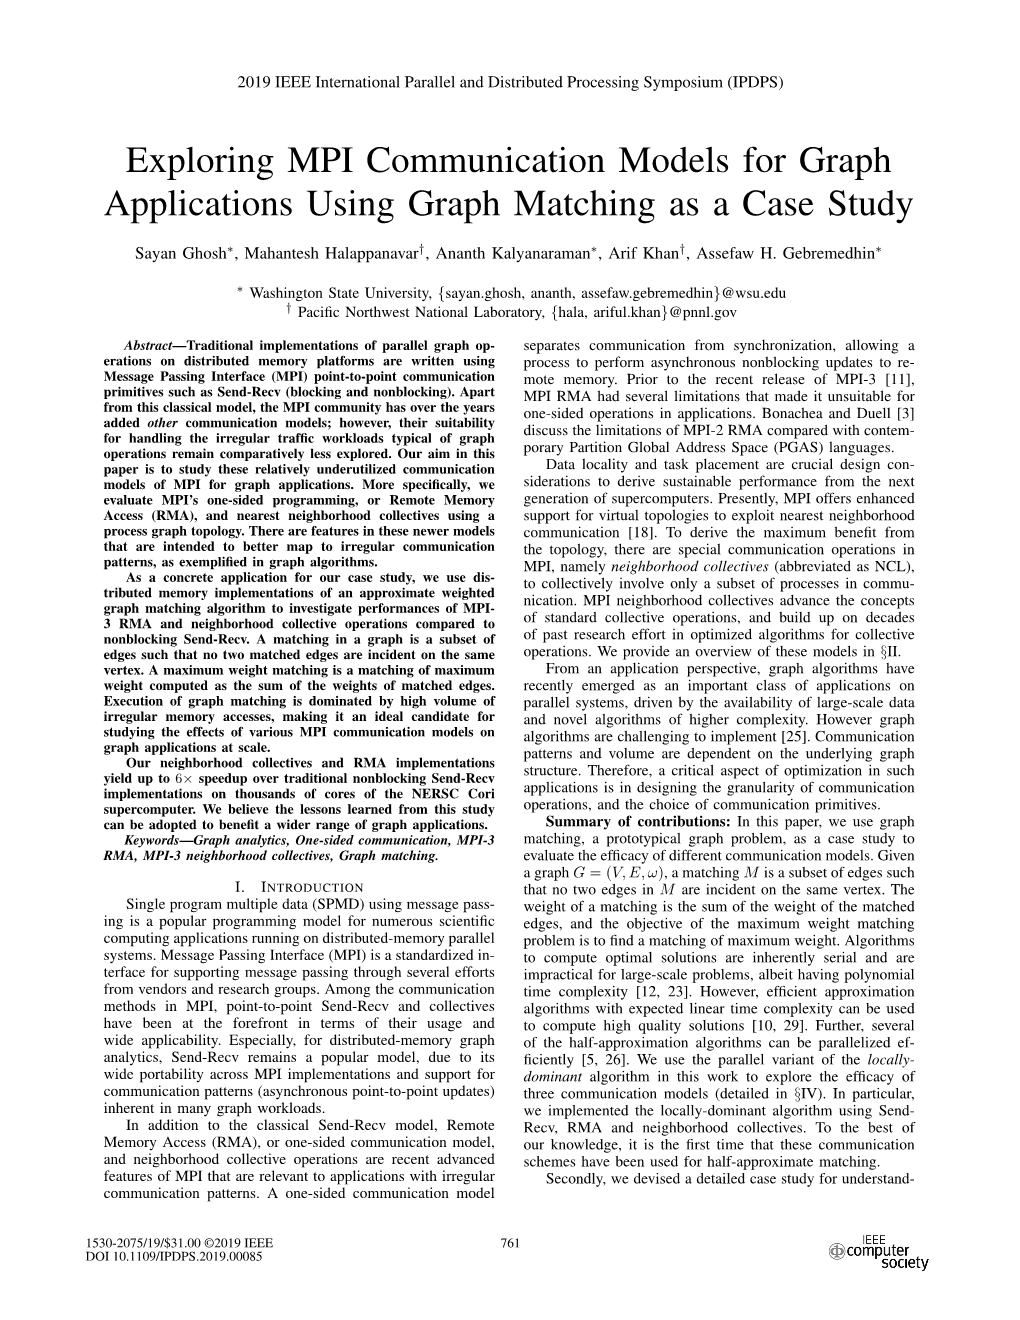 Exploring MPI Communication Models for Graph Applications Using Graph Matching As a Case Study